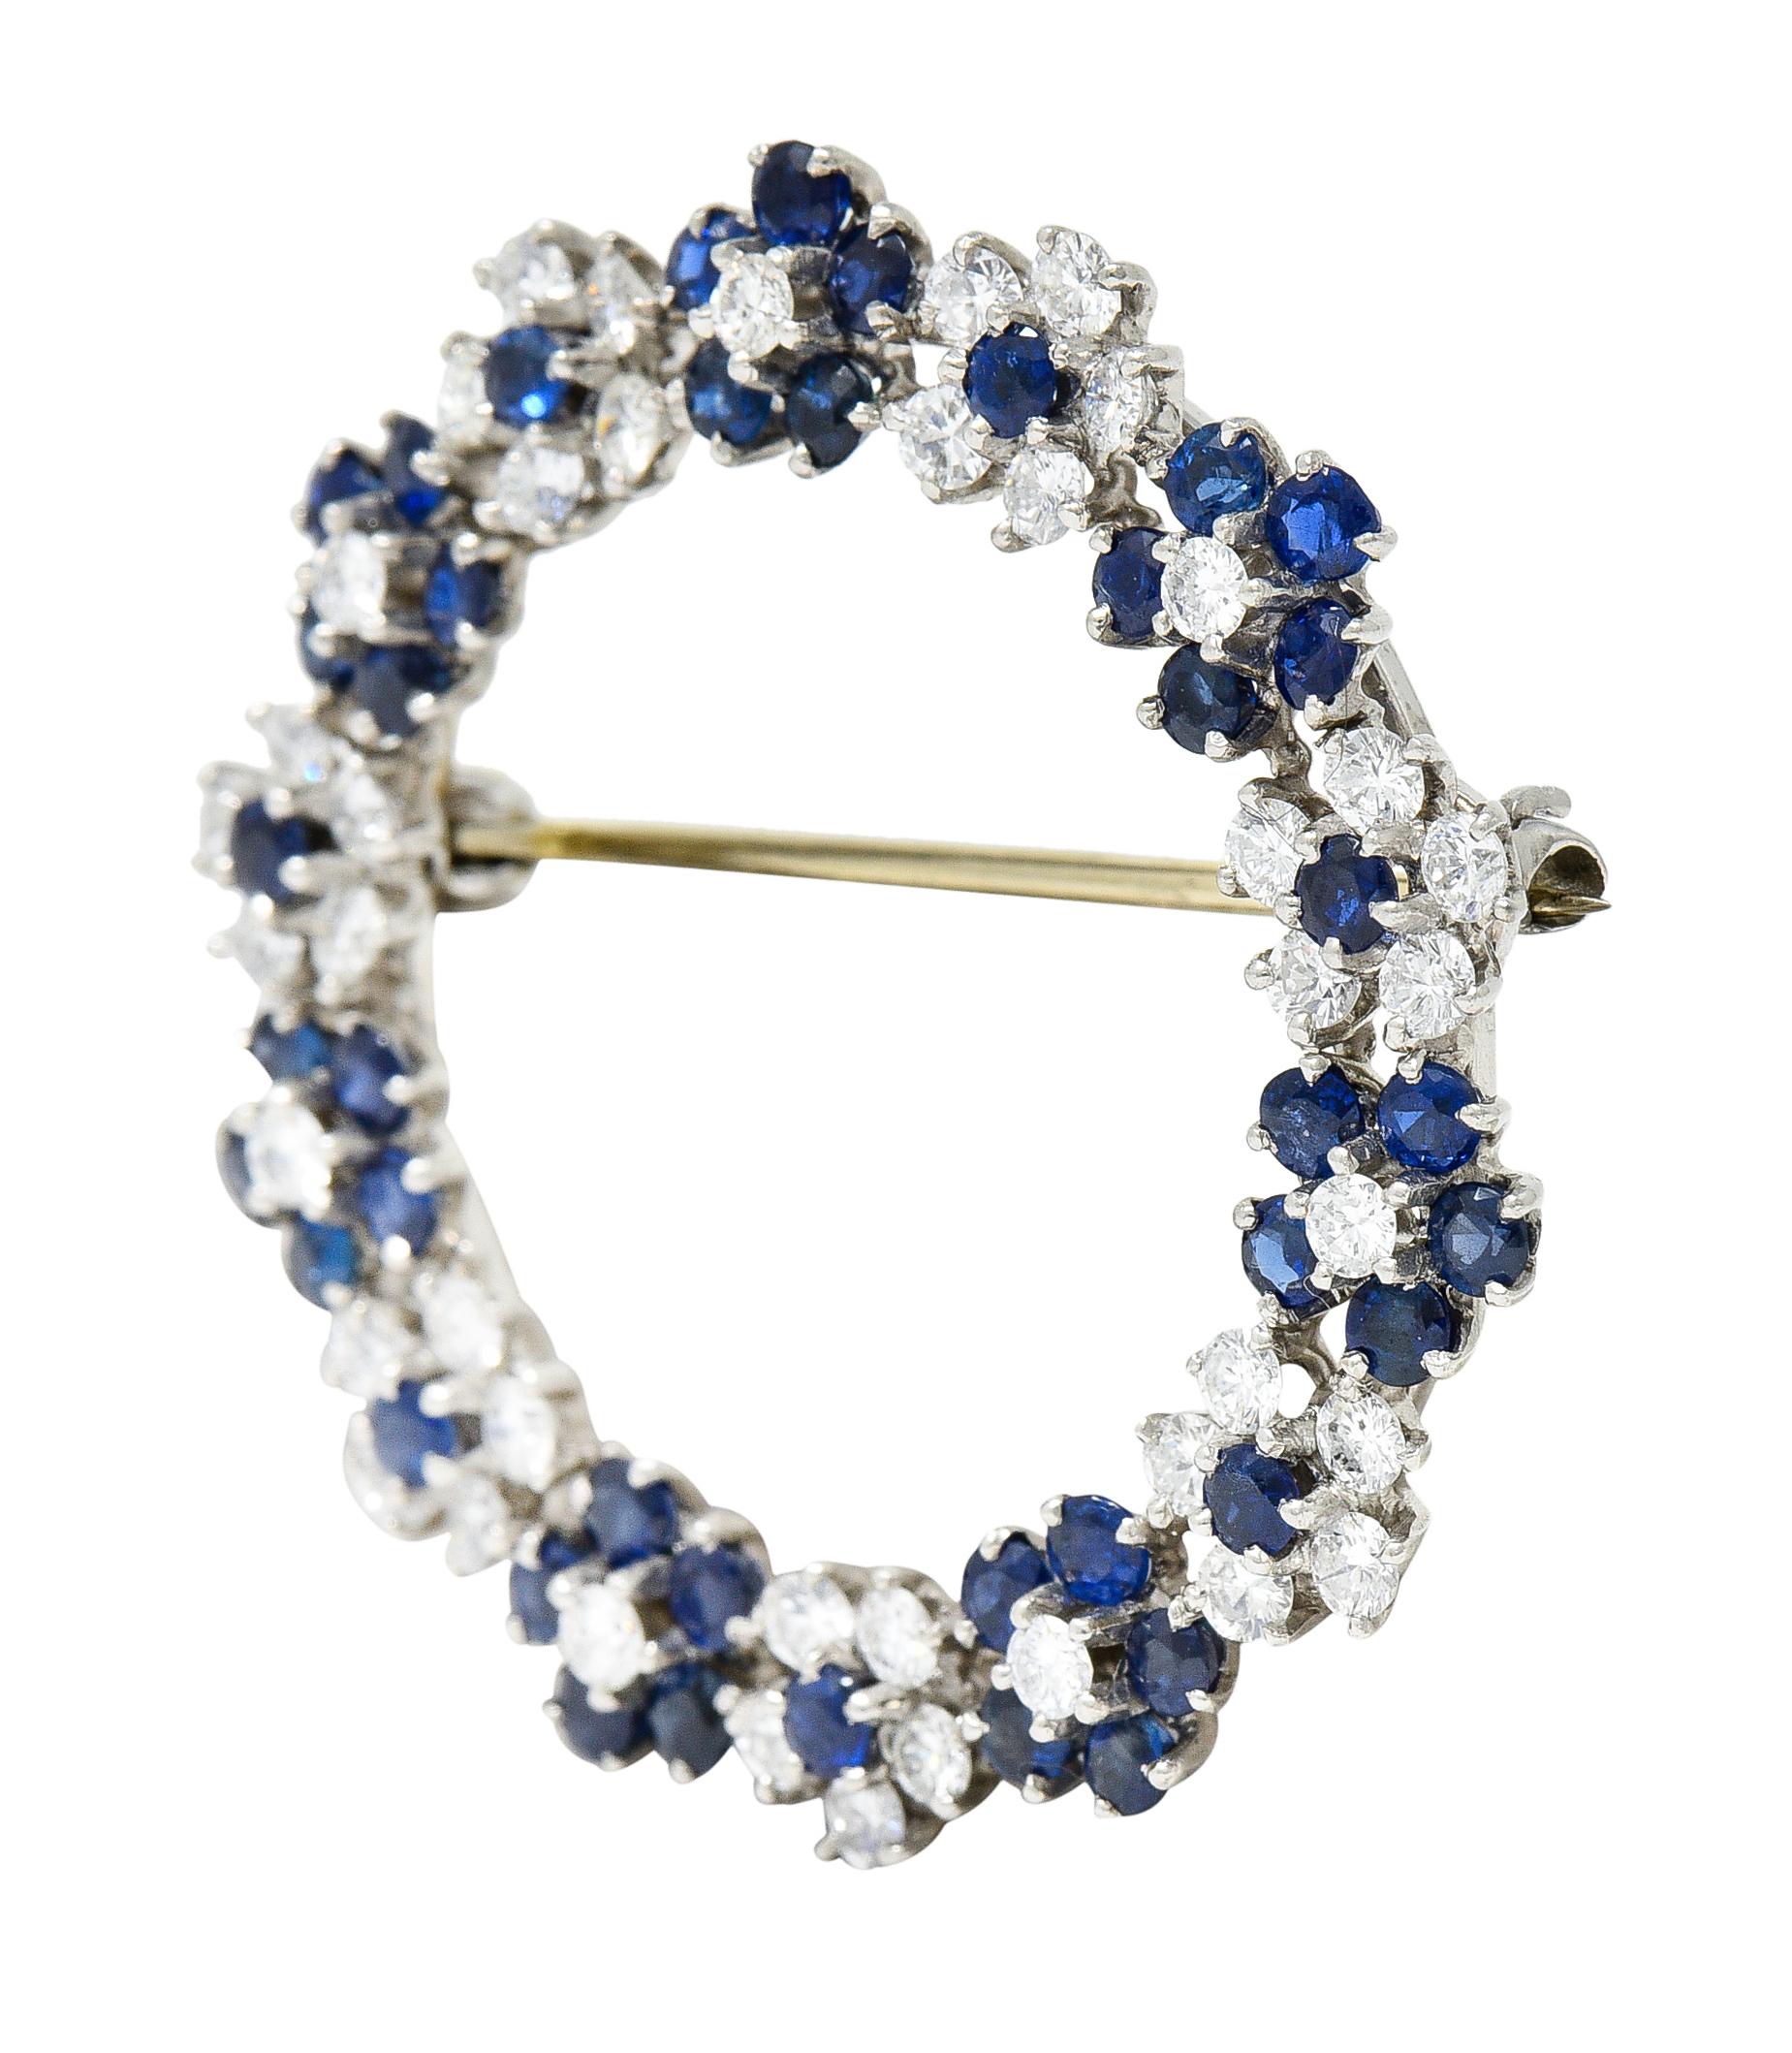 Circular brooch comprised of floral clusters of sapphires and diamonds

Round cut sapphires are well matched in strong royal blue color

Weighing in total approximately 1.80 carats

Round brilliant cut diamonds weigh in total approximately 1.25